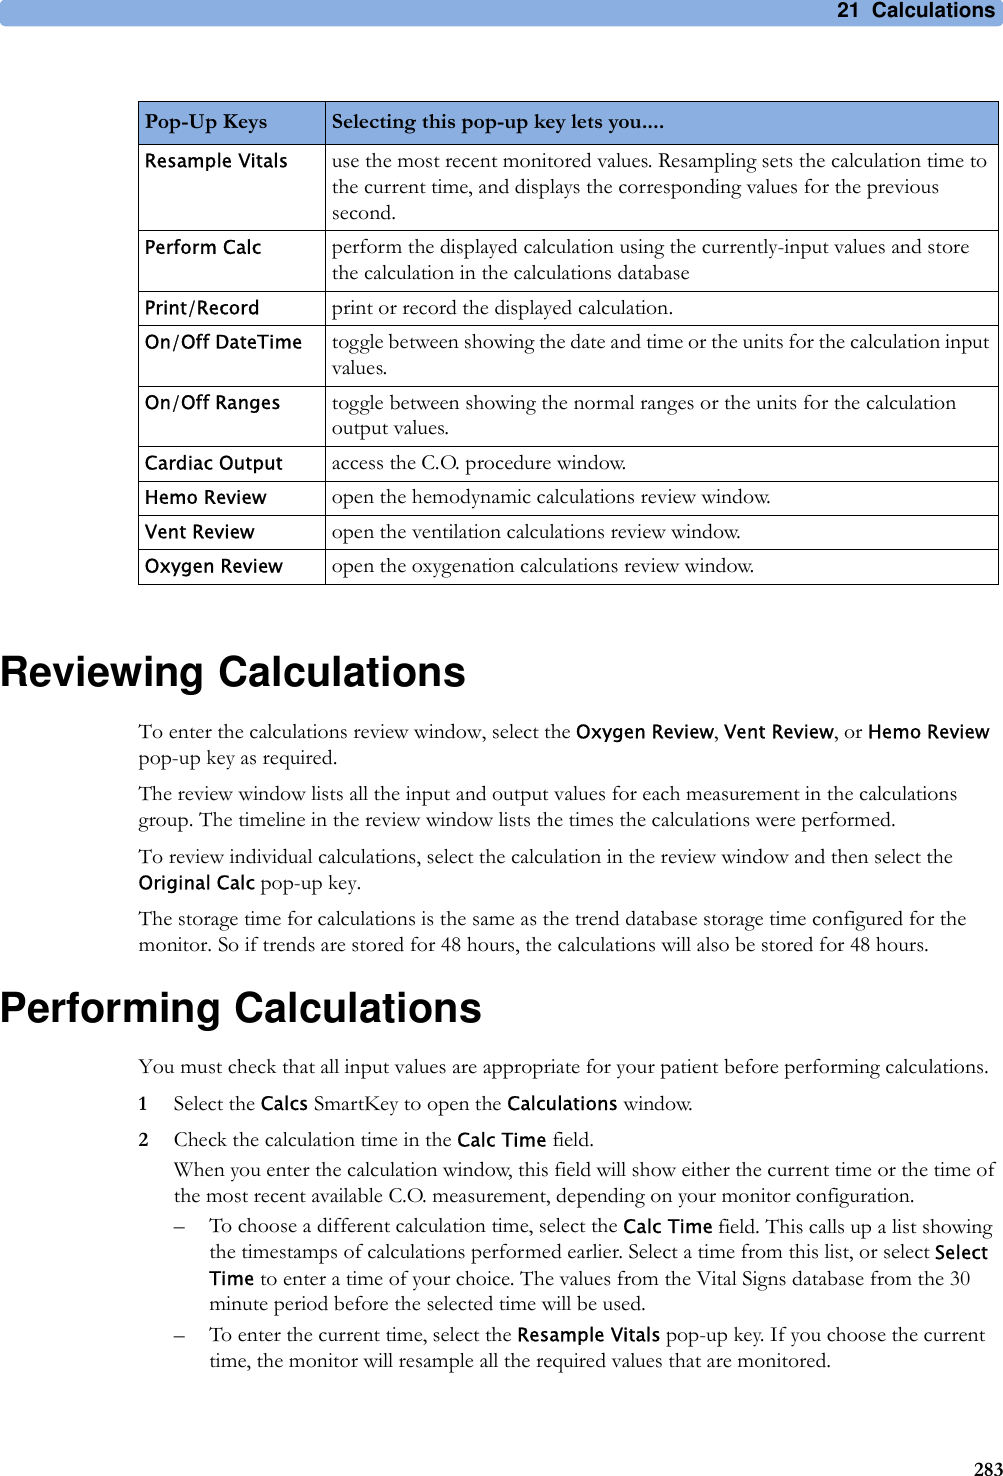 21 Calculations283Reviewing CalculationsTo enter the calculations review window, select the Oxygen Review, Vent Review, or Hemo Review pop-up key as required.The review window lists all the input and output values for each measurement in the calculations group. The timeline in the review window lists the times the calculations were performed.To review individual calculations, select the calculation in the review window and then select the Original Calc pop-up key.The storage time for calculations is the same as the trend database storage time configured for the monitor. So if trends are stored for 48 hours, the calculations will also be stored for 48 hours.Performing CalculationsYou must check that all input values are appropriate for your patient before performing calculations.1Select the Calcs SmartKey to open the Calculations window.2Check the calculation time in the Calc Time field.When you enter the calculation window, this field will show either the current time or the time of the most recent available C.O. measurement, depending on your monitor configuration.– To choose a different calculation time, select the Calc Time field. This calls up a list showing the timestamps of calculations performed earlier. Select a time from this list, or select Select Time to enter a time of your choice. The values from the Vital Signs database from the 30 minute period before the selected time will be used. – To enter the current time, select the Resample Vitals pop-up key. If you choose the current time, the monitor will resample all the required values that are monitored.Pop-Up Keys Selecting this pop-up key lets you....Resample Vitals use the most recent monitored values. Resampling sets the calculation time to the current time, and displays the corresponding values for the previous second.Perform Calc perform the displayed calculation using the currently-input values and store the calculation in the calculations databasePrint/Record print or record the displayed calculation.On/Off DateTime toggle between showing the date and time or the units for the calculation input values.On/Off Ranges toggle between showing the normal ranges or the units for the calculation output values.Cardiac Output access the C.O. procedure window.Hemo Review open the hemodynamic calculations review window.Vent Review open the ventilation calculations review window.Oxygen Review open the oxygenation calculations review window.